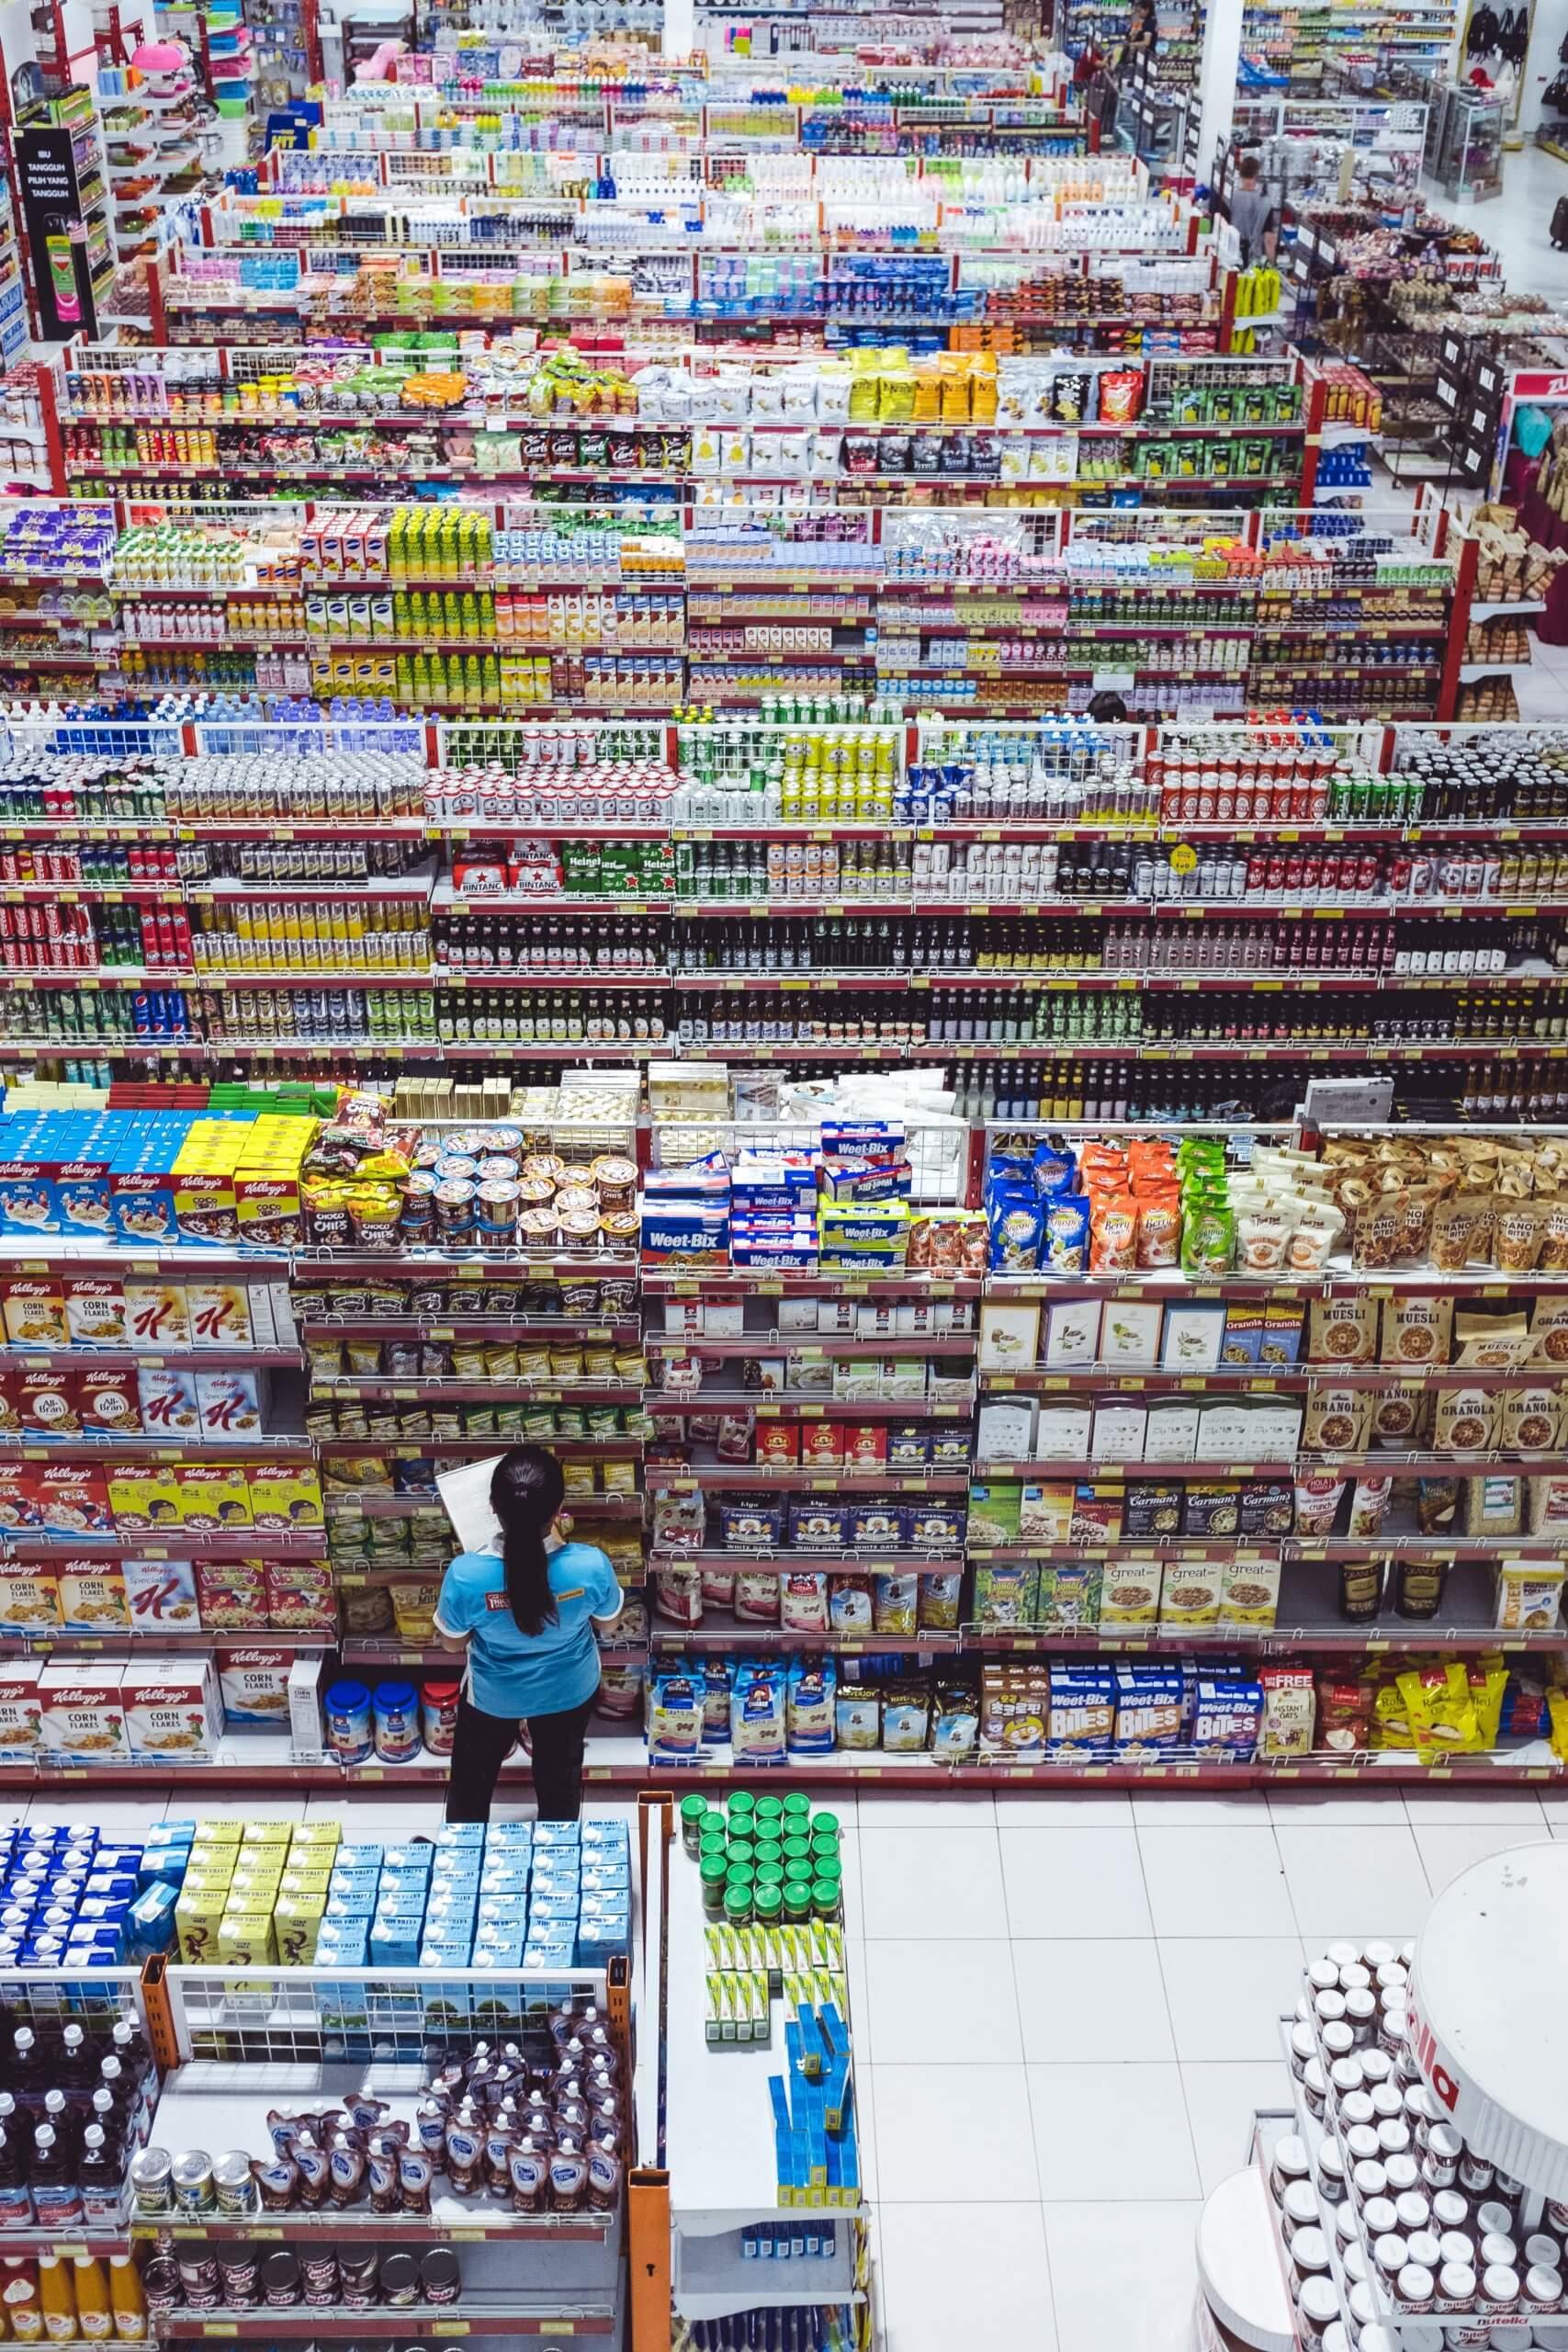 View of store shelves packed with products and clerk int he foreground checking labels